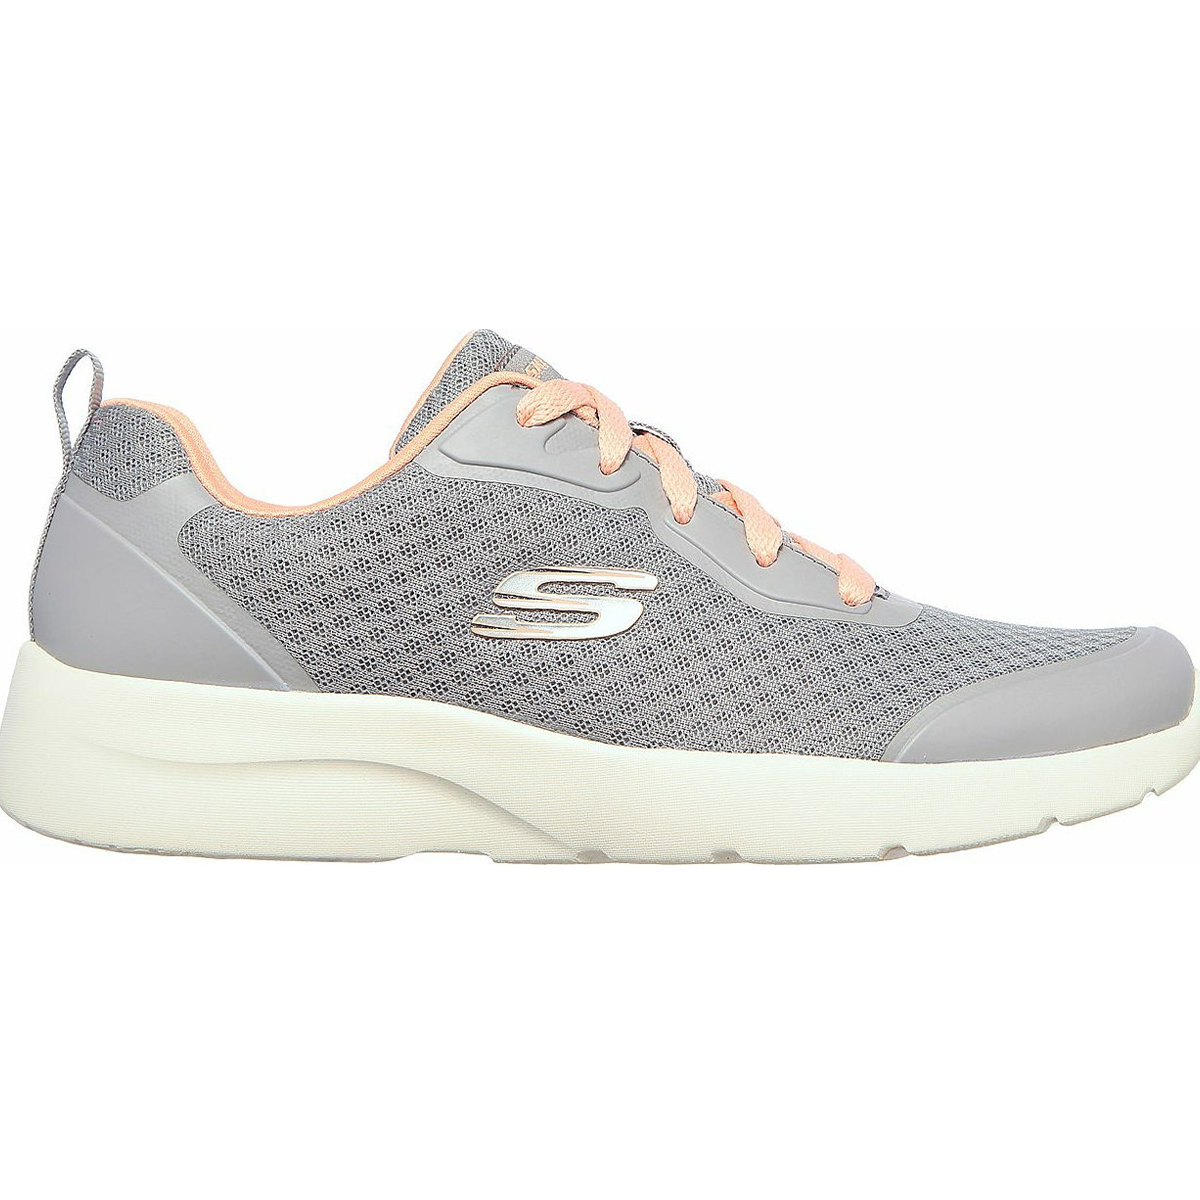 20210329104439 skechers dynamight 2 0 149541 gycl